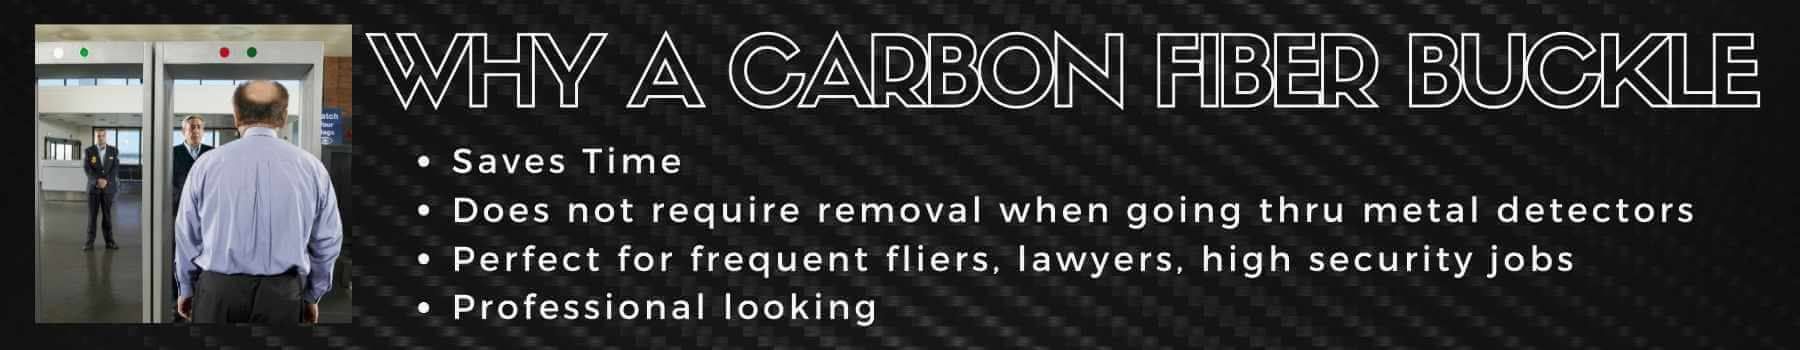 Why A carbon fiber buckle? Saves time, doesn't require removal when going thru metal detectors, perfect for frequent fliers, lawyers, high security jobs, professional looking.